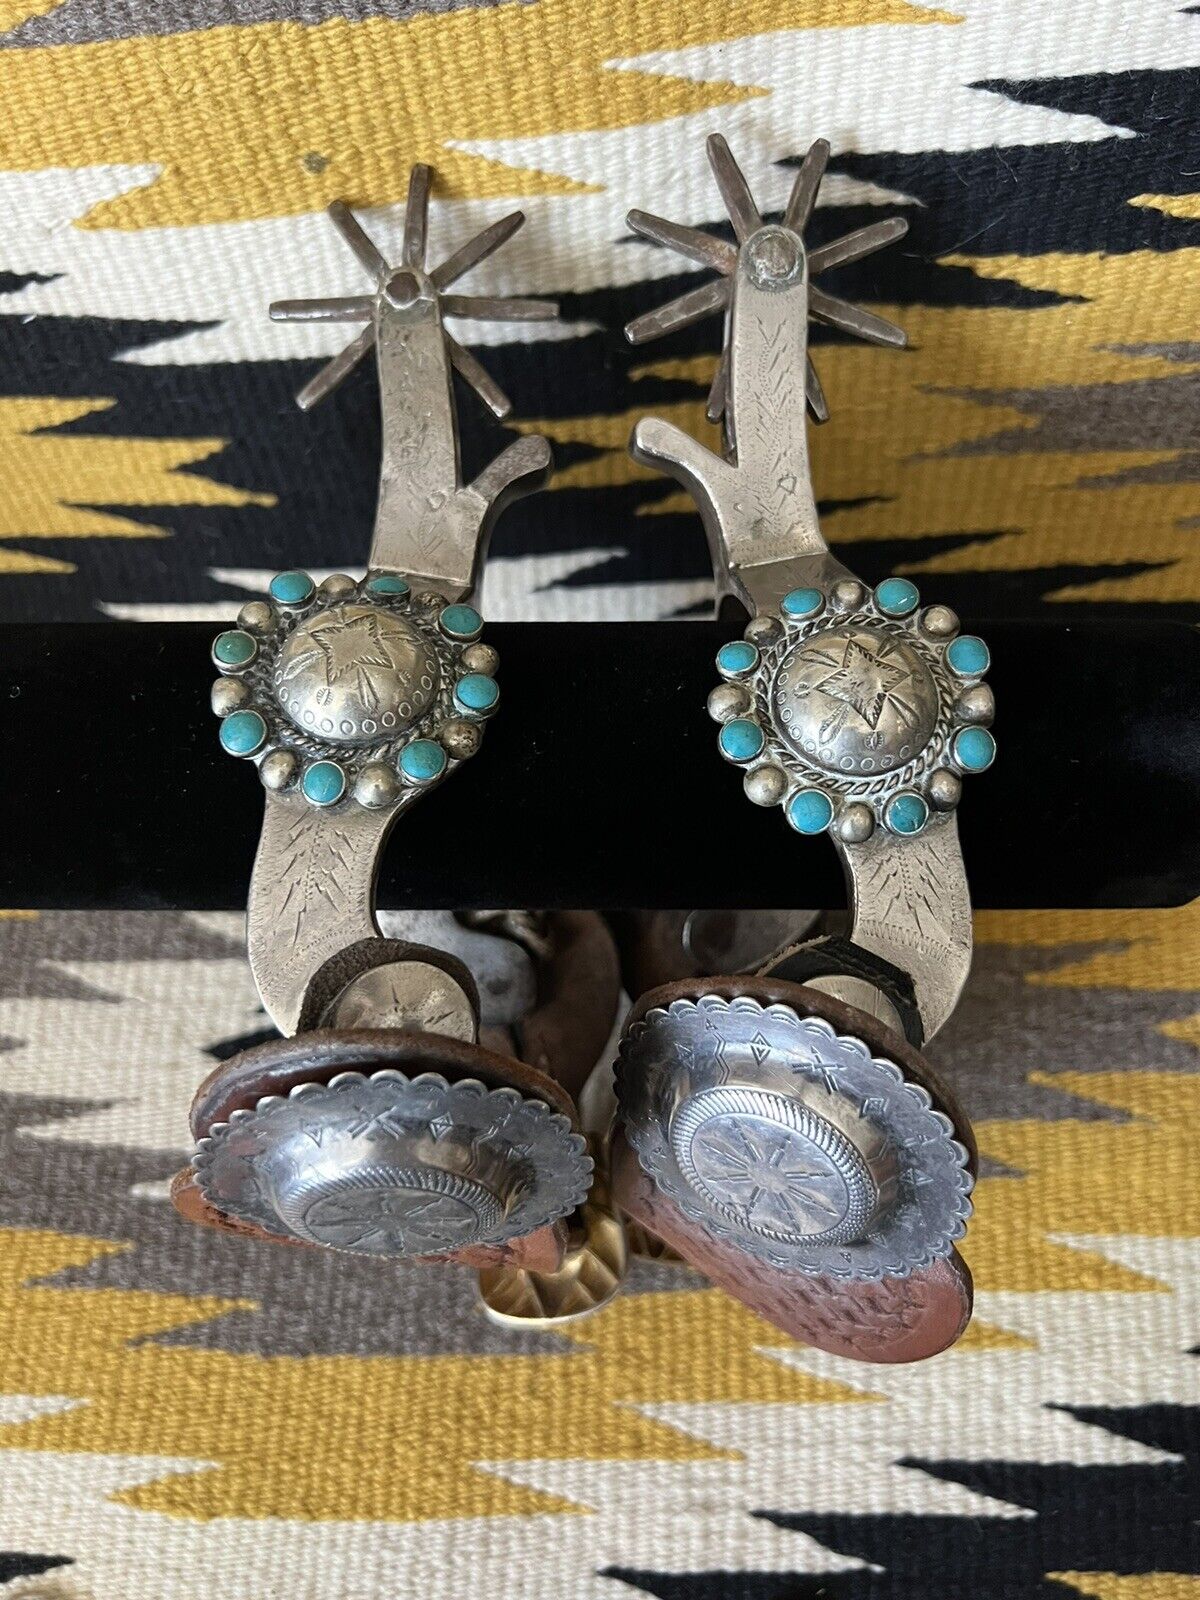 Pair of Old Crockett Silver Mntd Spurs with Huge Rowels Turquoise Concho Straps